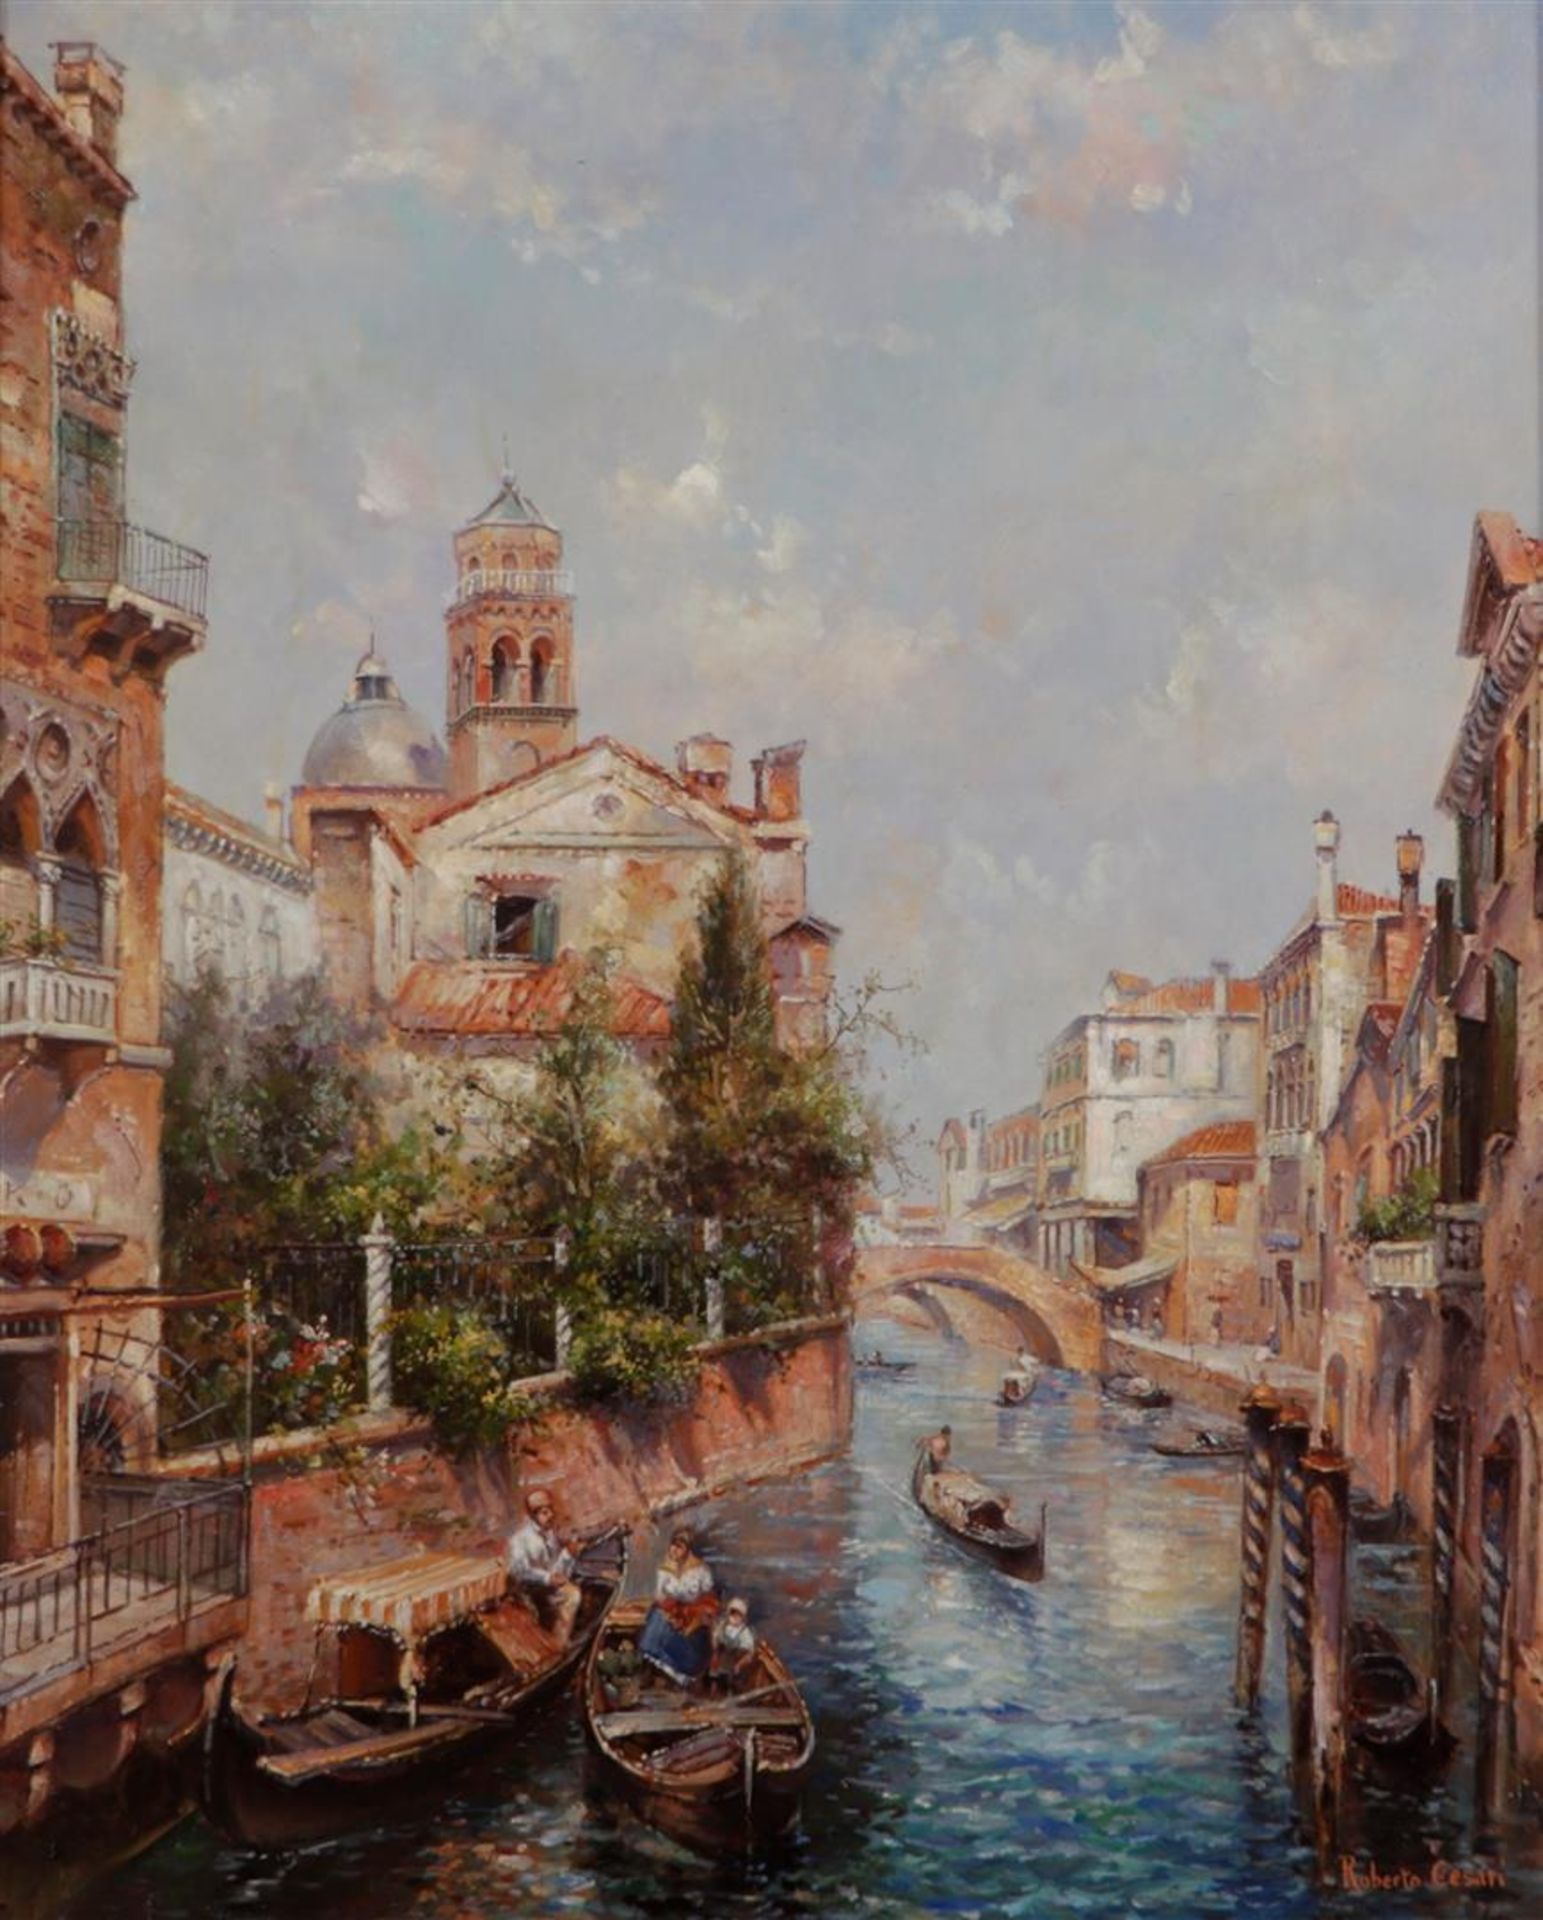 RobertCesari (B. France/Italy: 1949), View of Venice (Canale di Cannaregio) with the tower of San Ge